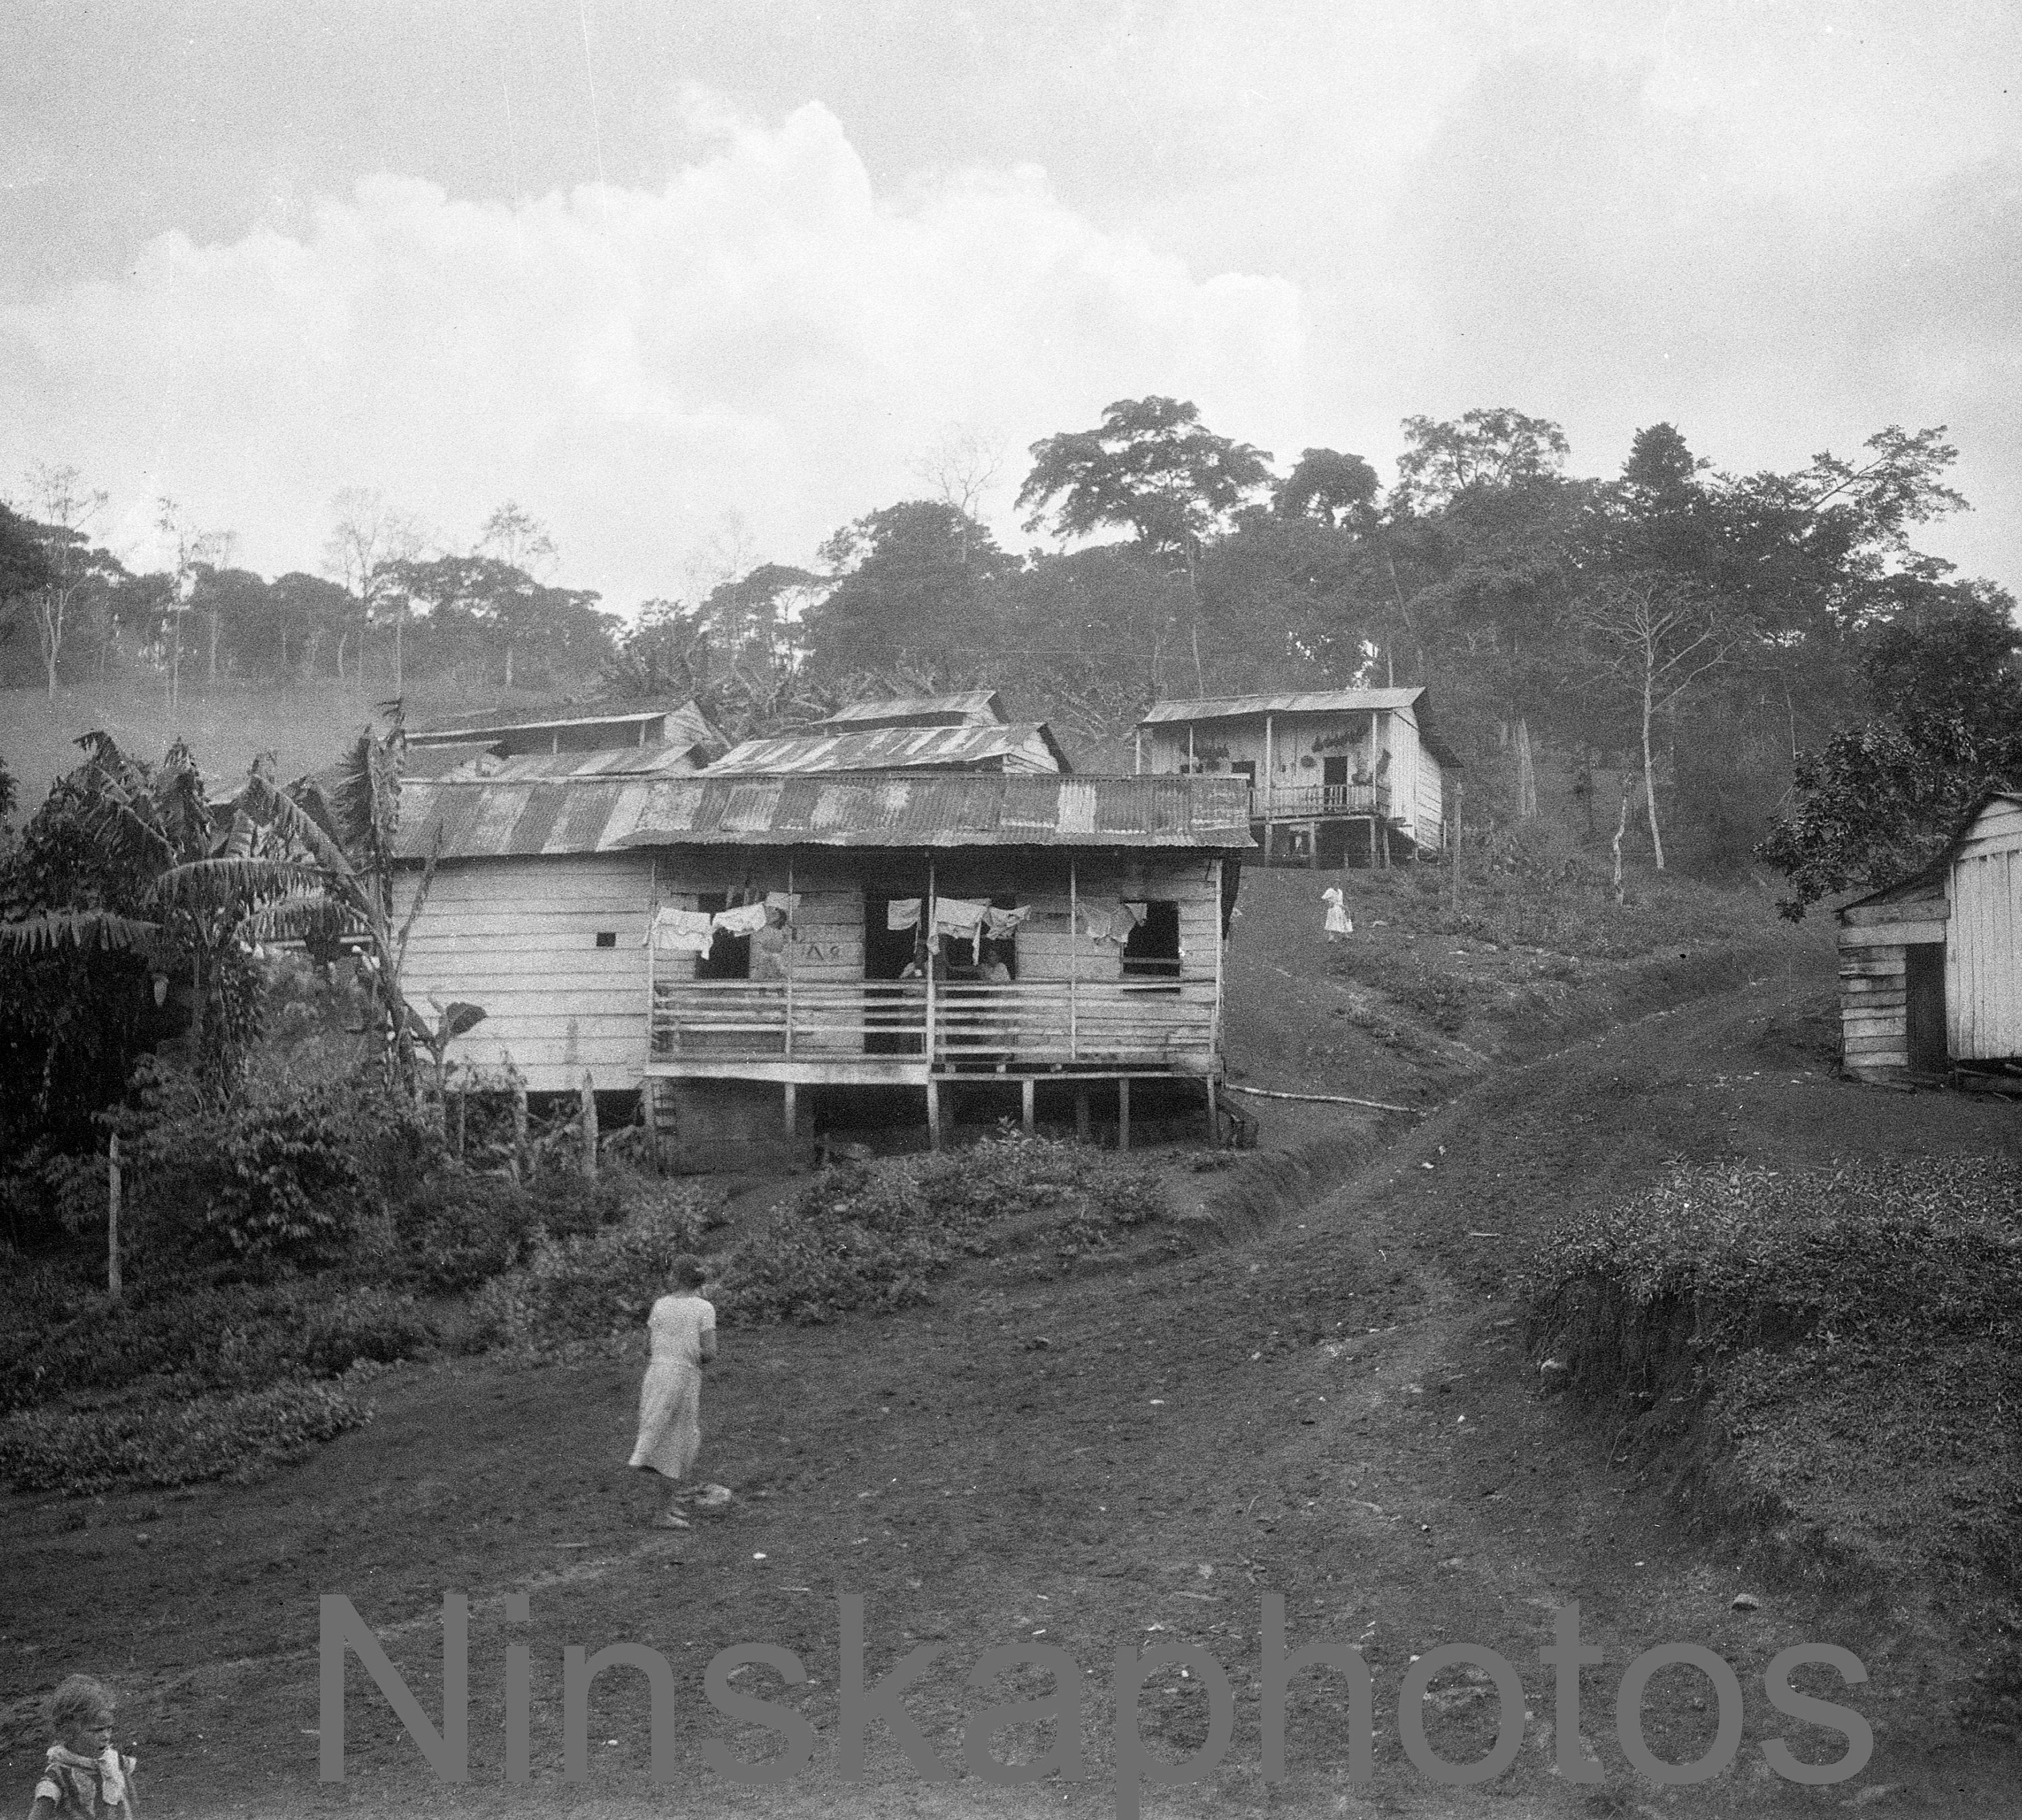 19s Costa Rica Houses By The Railway En Route To San Jose By J Dearden Holmes 19s Antique Photo Reprint Vintage Photography